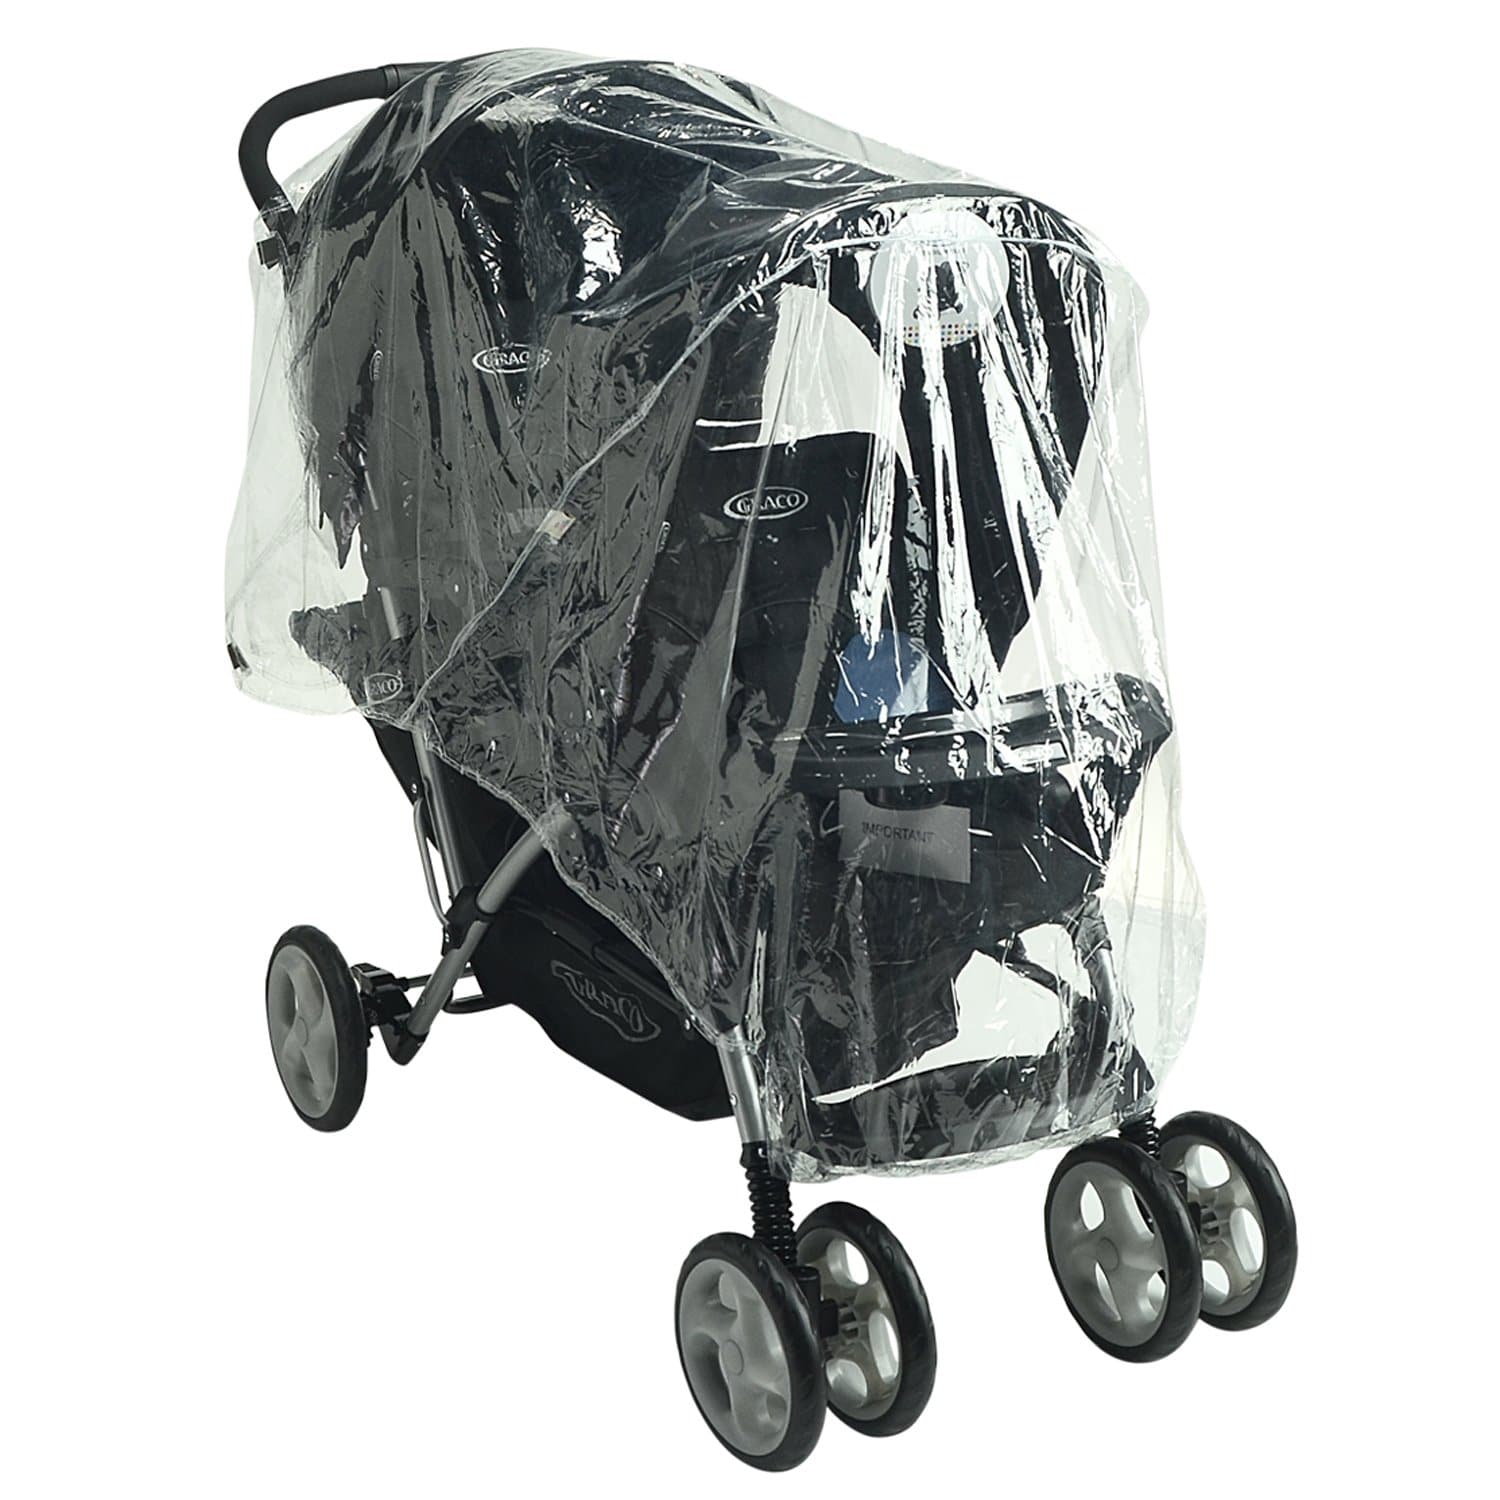 Universal Rain Cover For All Front And Back Pushchairs - For Your Little One